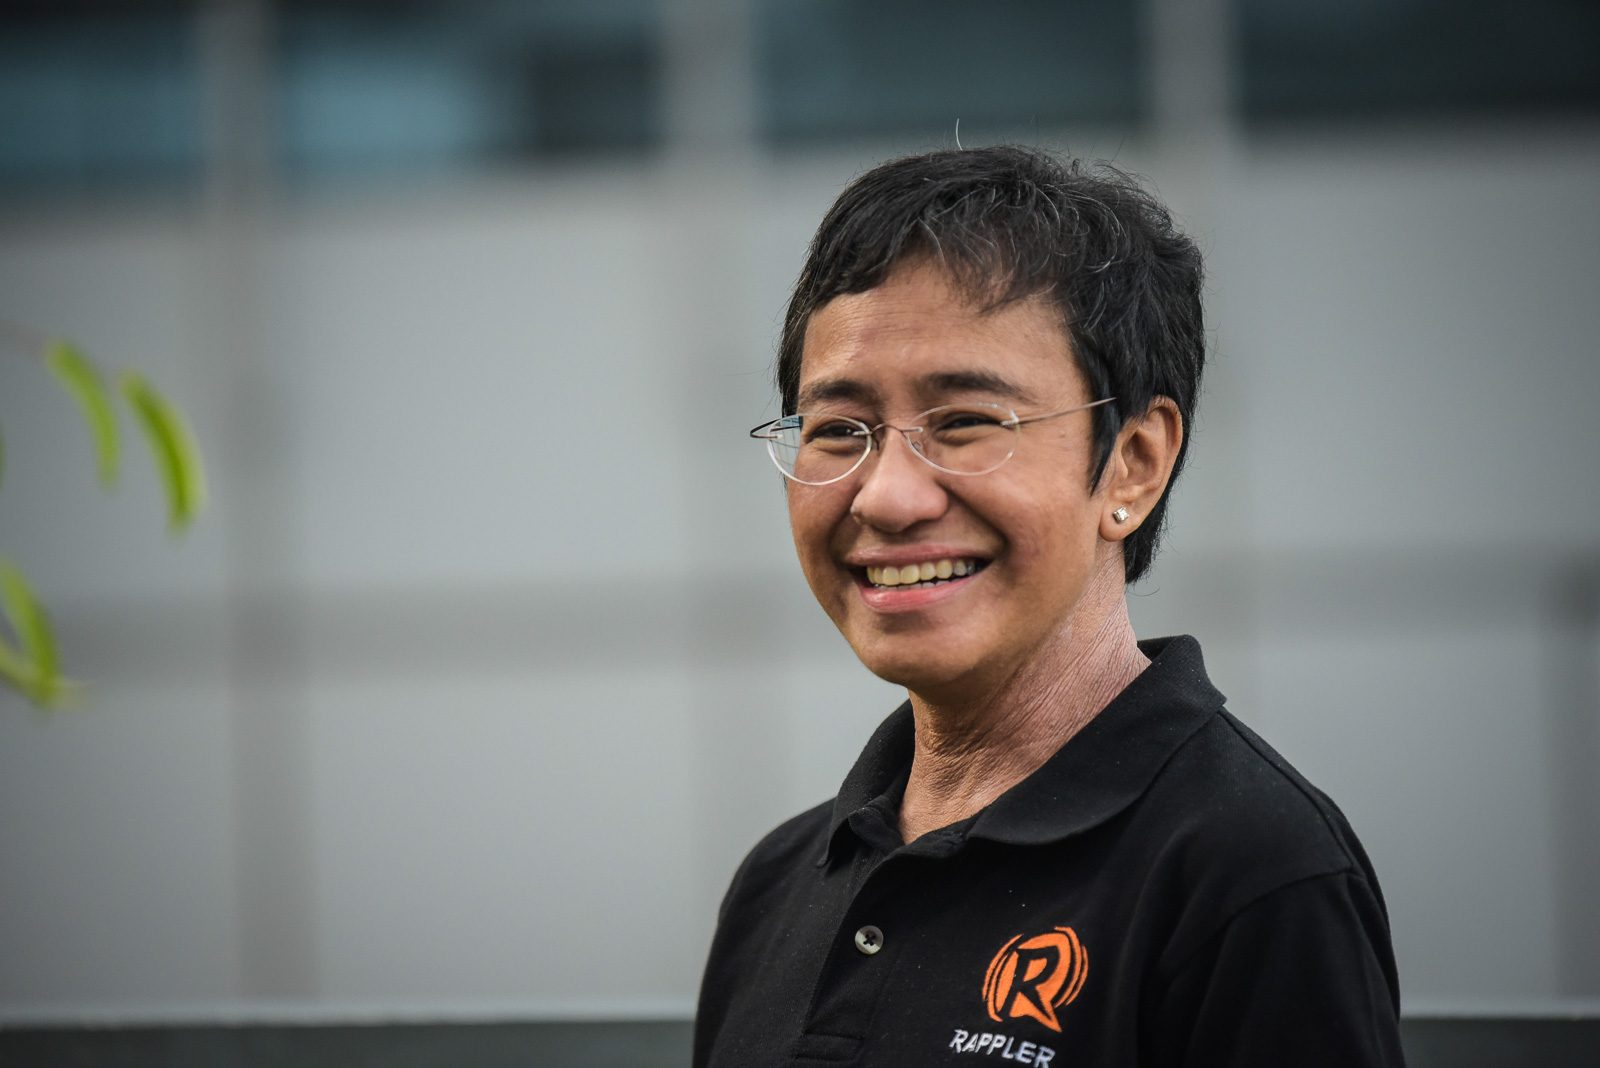 Anti-disinformation group says court should let Maria Ressa attend Nobel ceremony